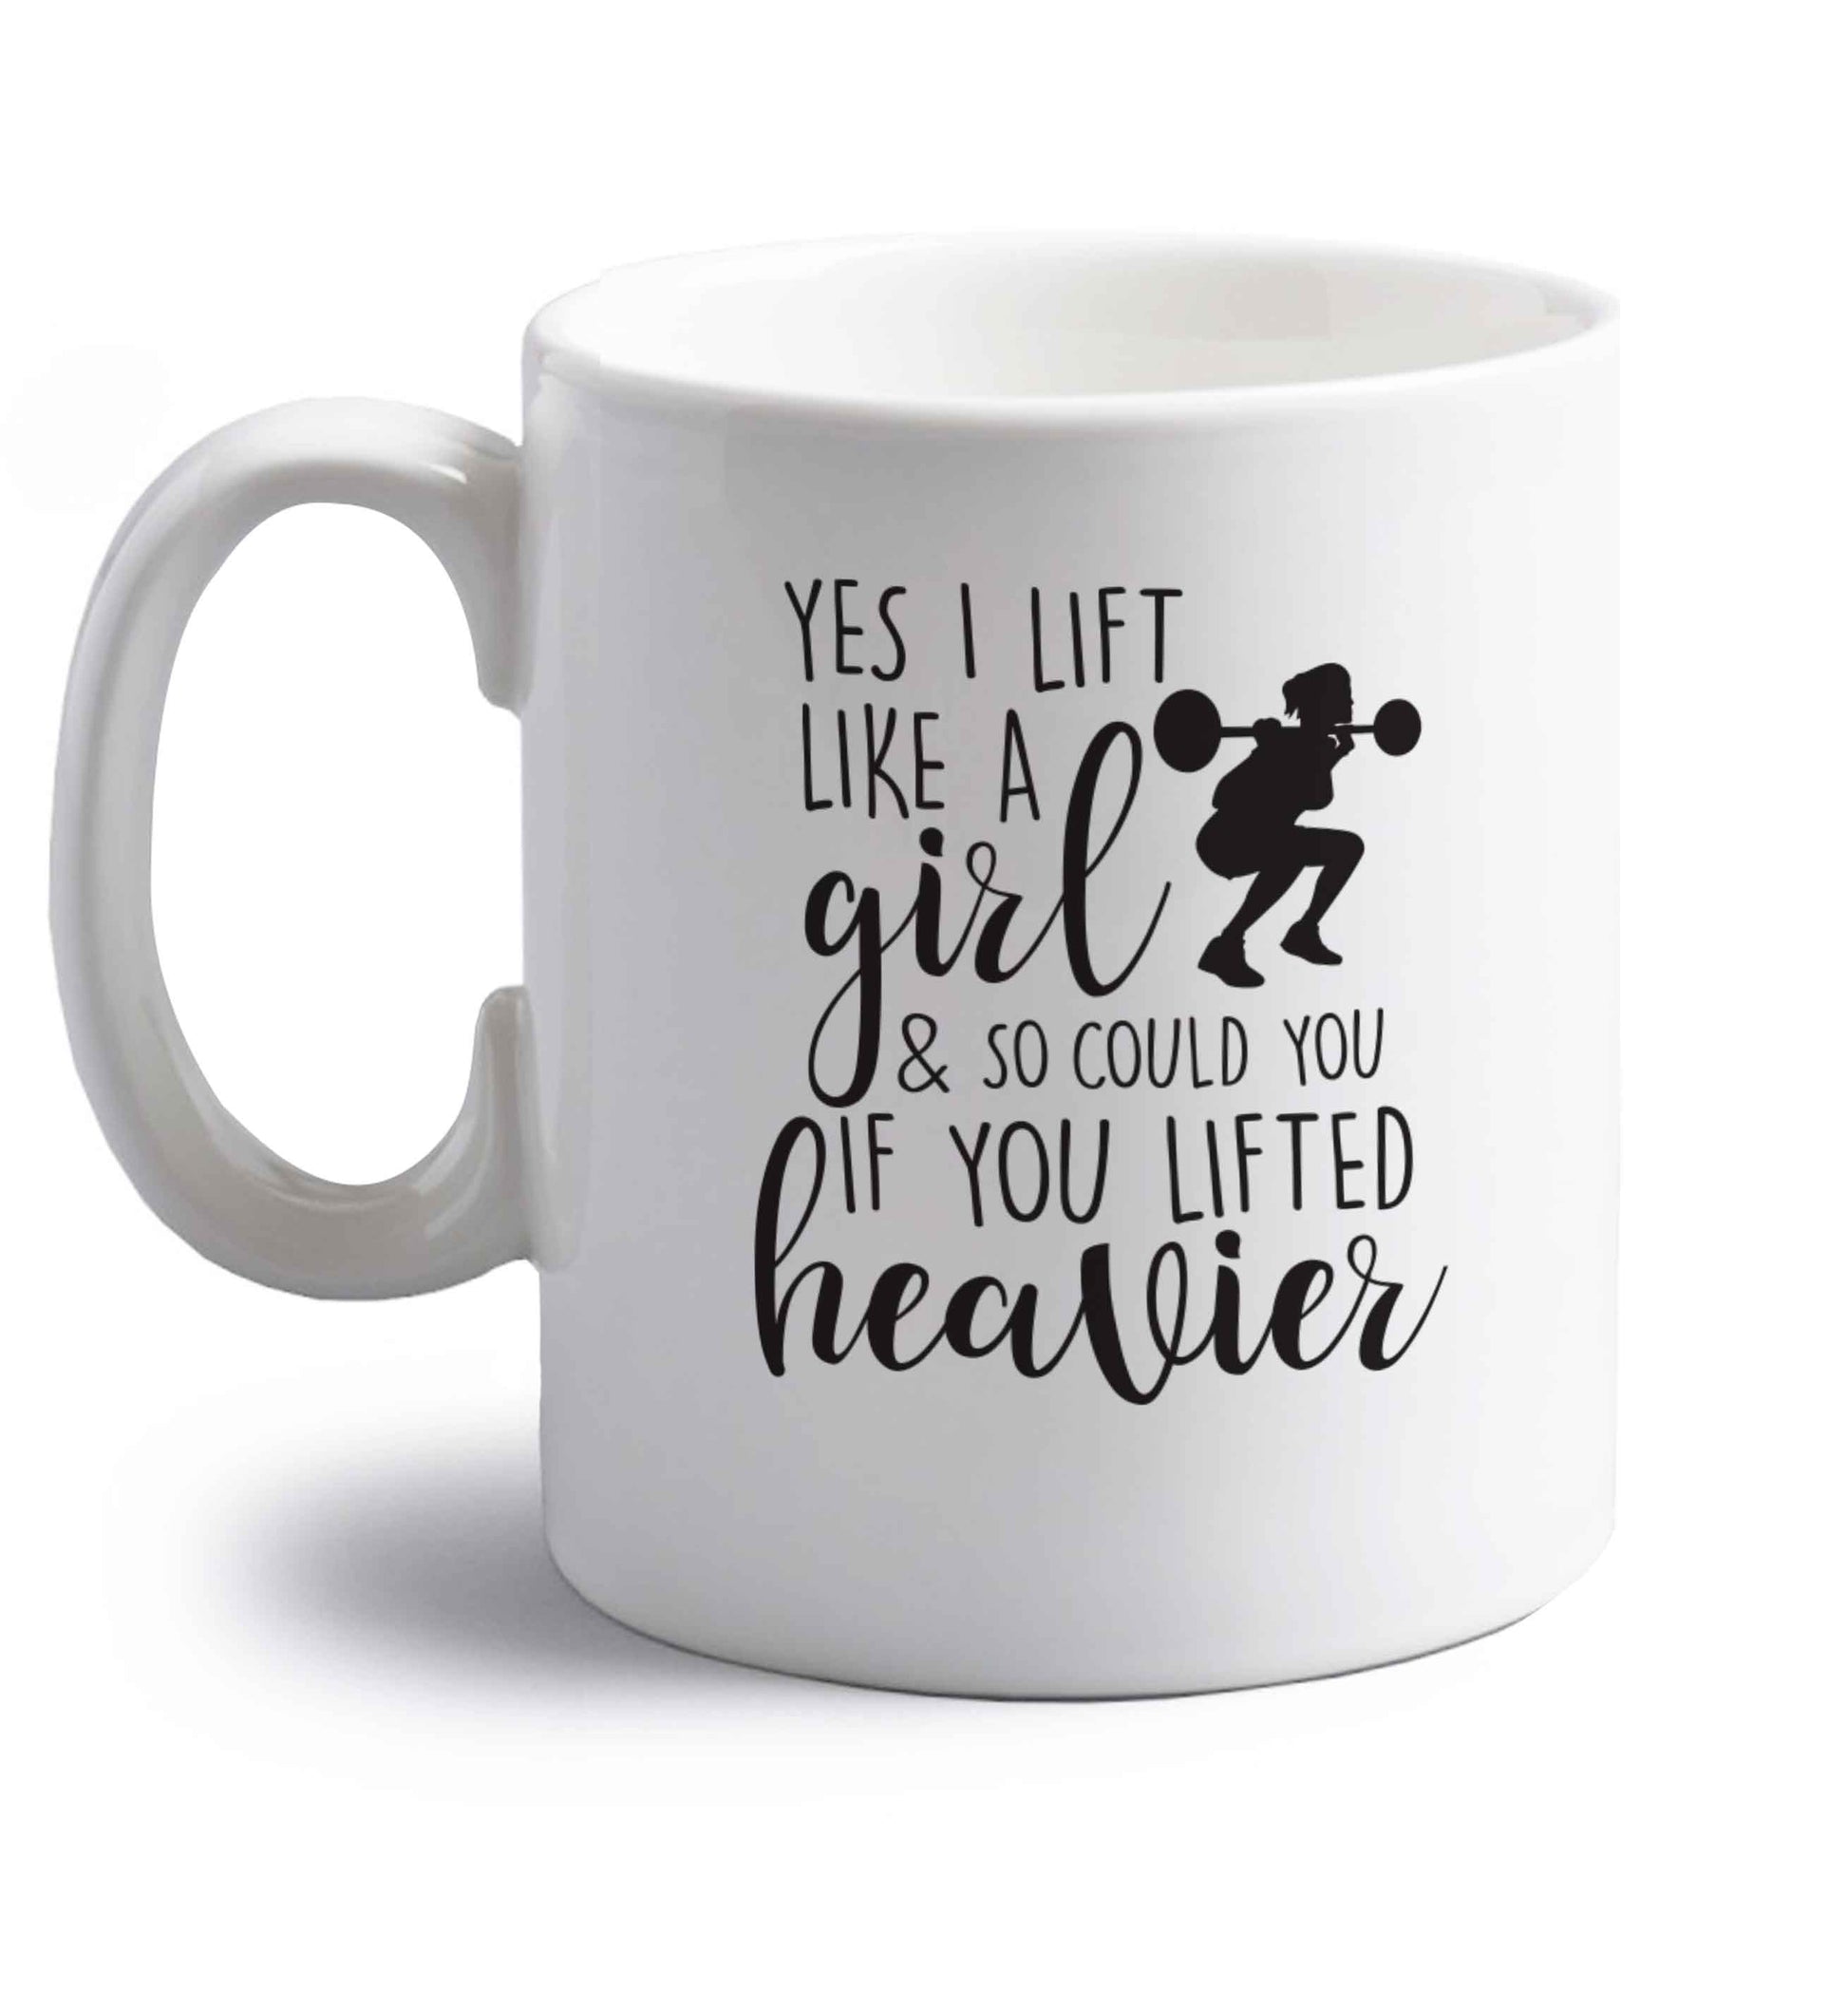 Yes I lift like a girl and so could you if you lifted heavier right handed white ceramic mug 